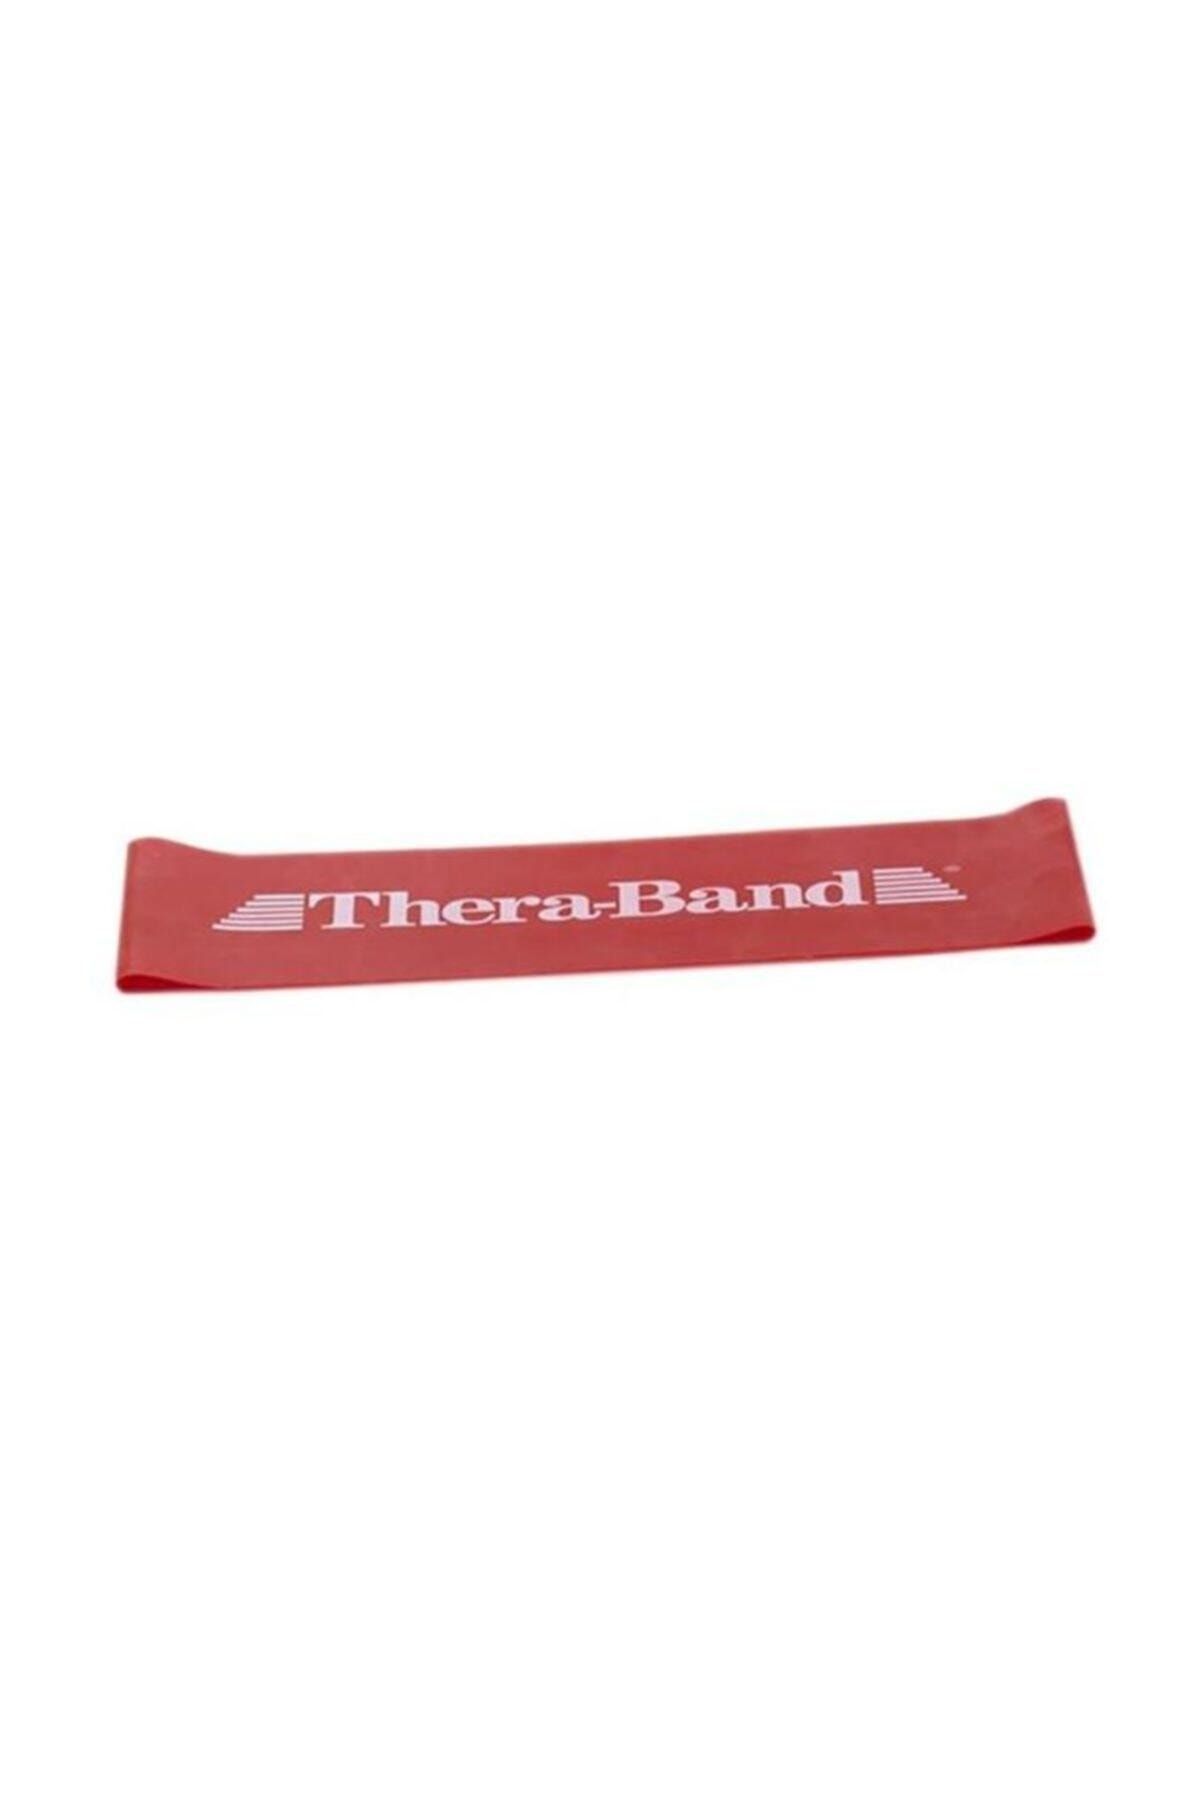 Theraband Resıstance Band Loop Red 12"